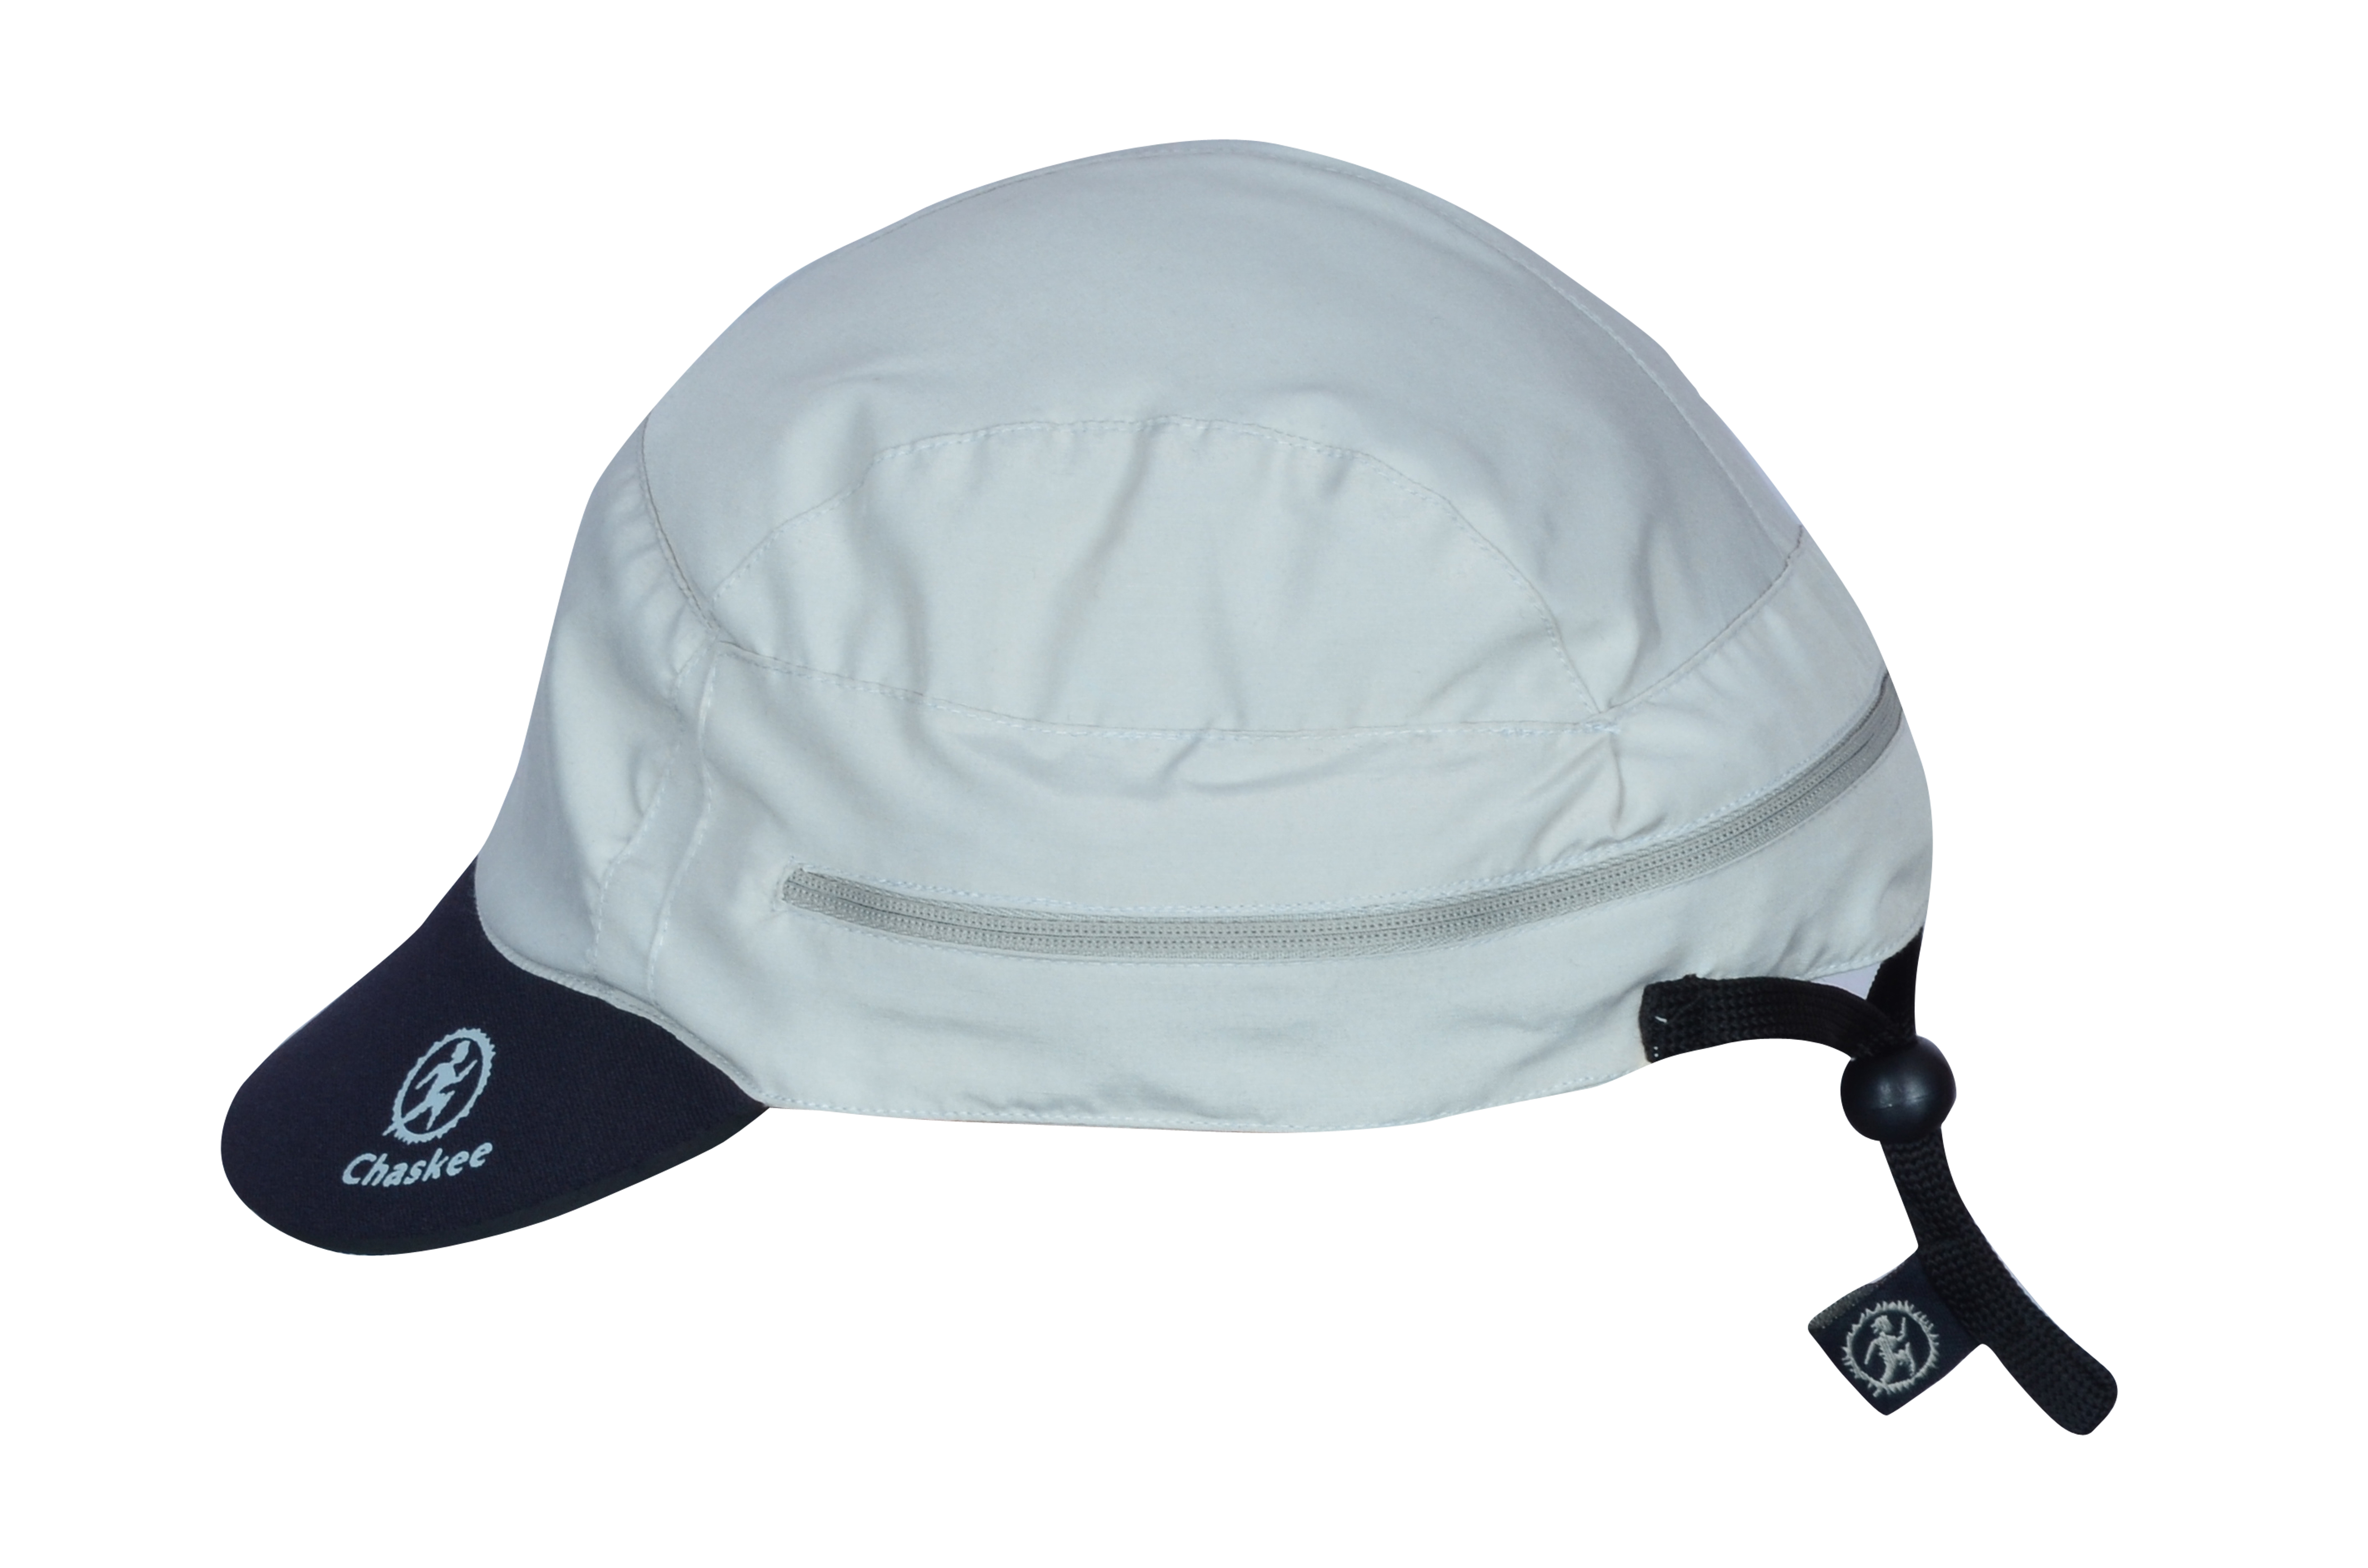 Chaskee ZUMA Solid Microfiber with Shapeable BRIMWIRE Visor Hat 